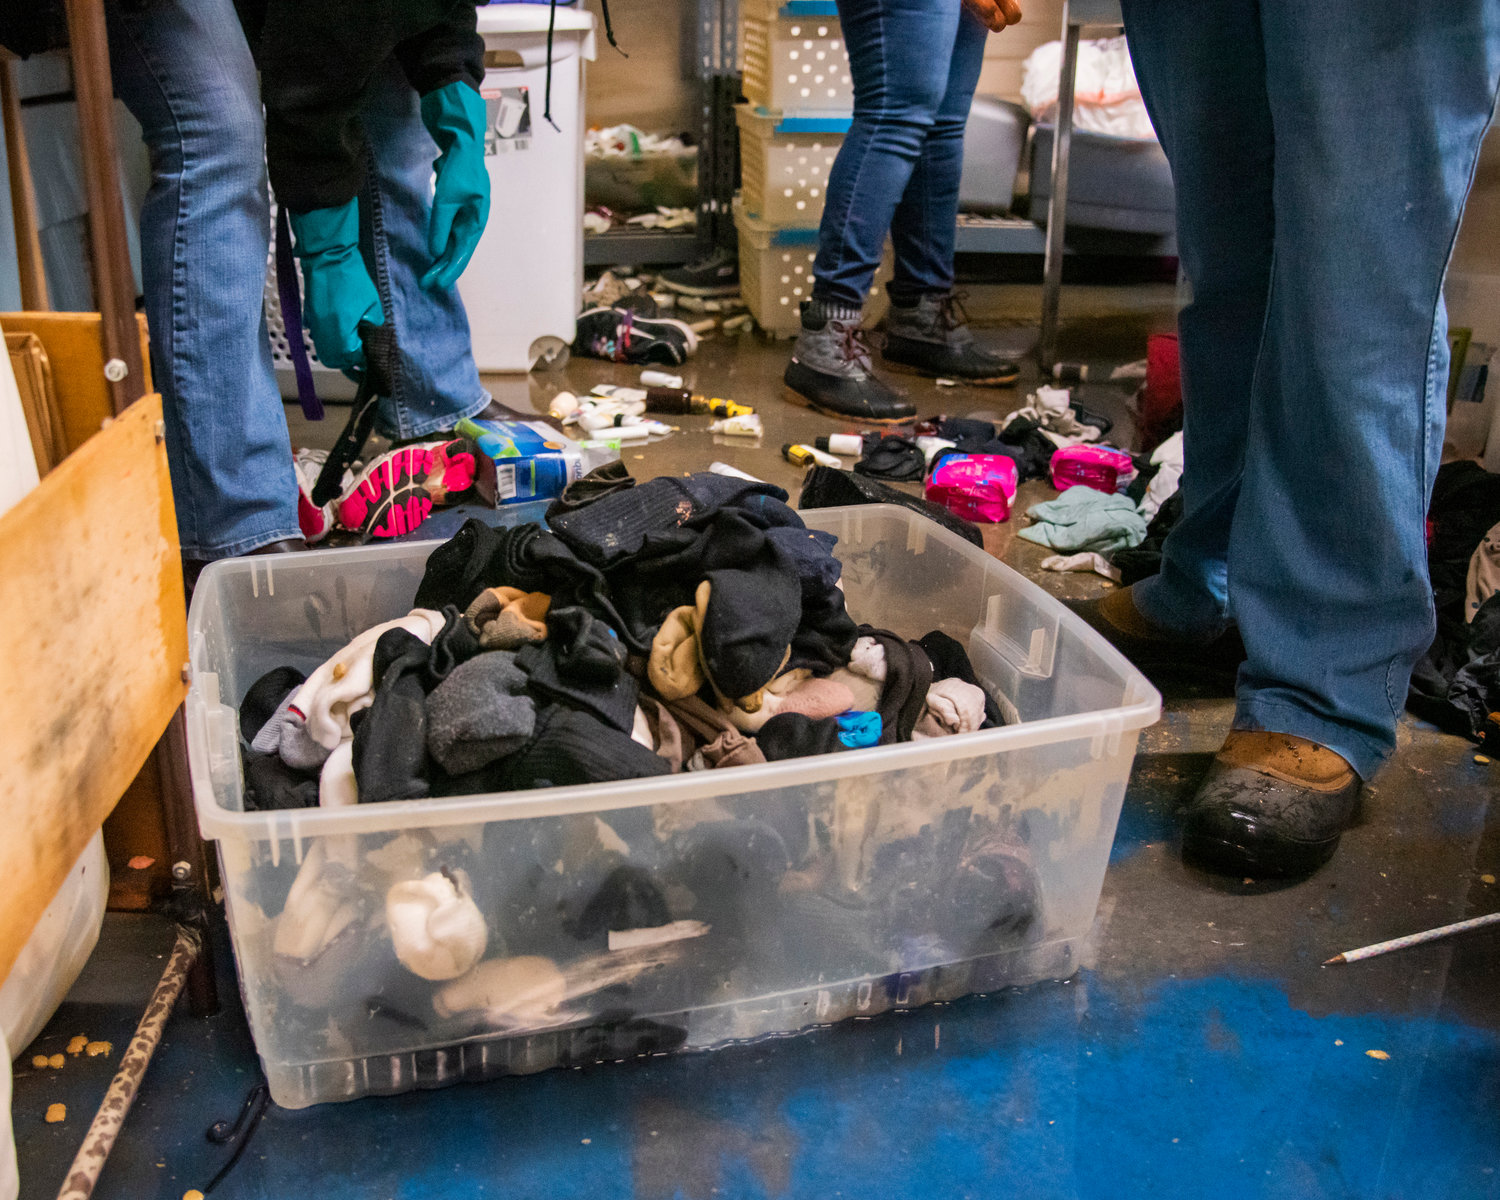 Wet socks are thrown into bins on Monday after shelves toppled into flood water inside Lewis County Gospel Mission.